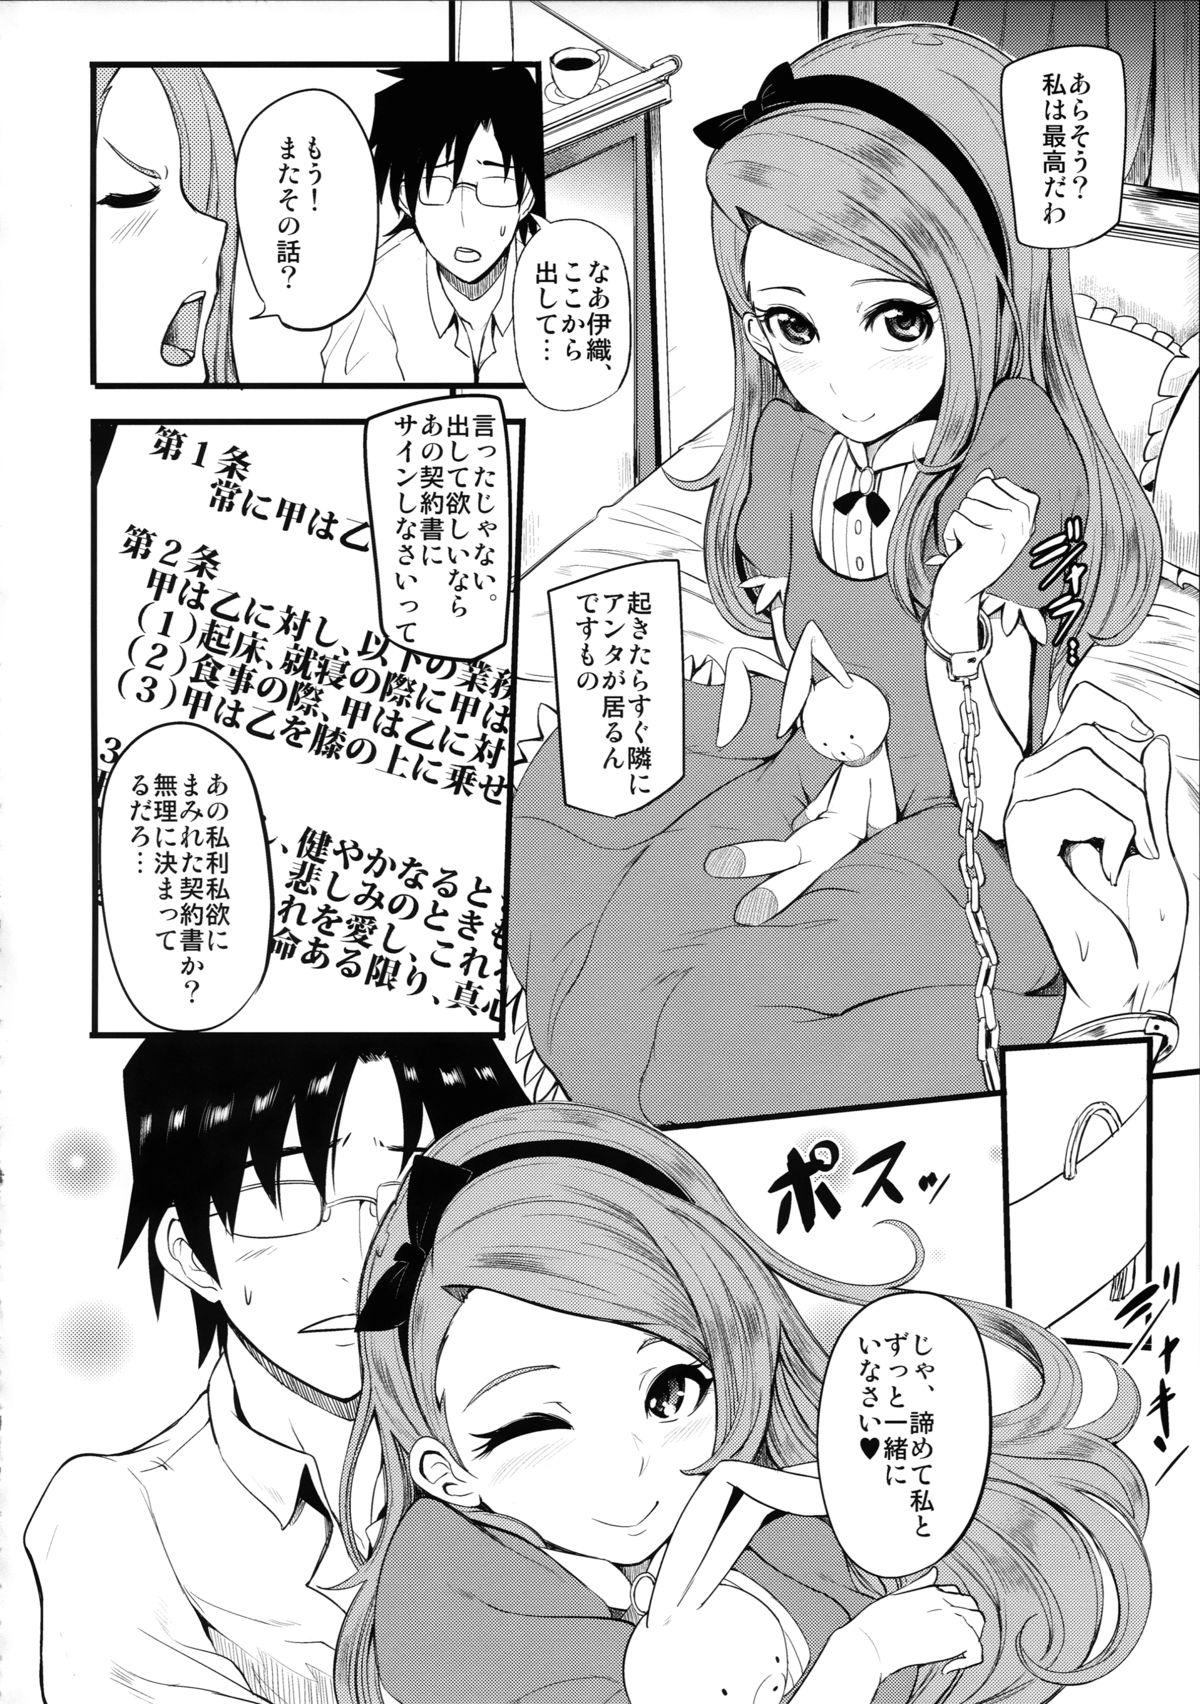 Francaise THE YANDEREM@STER - The idolmaster From - Page 4